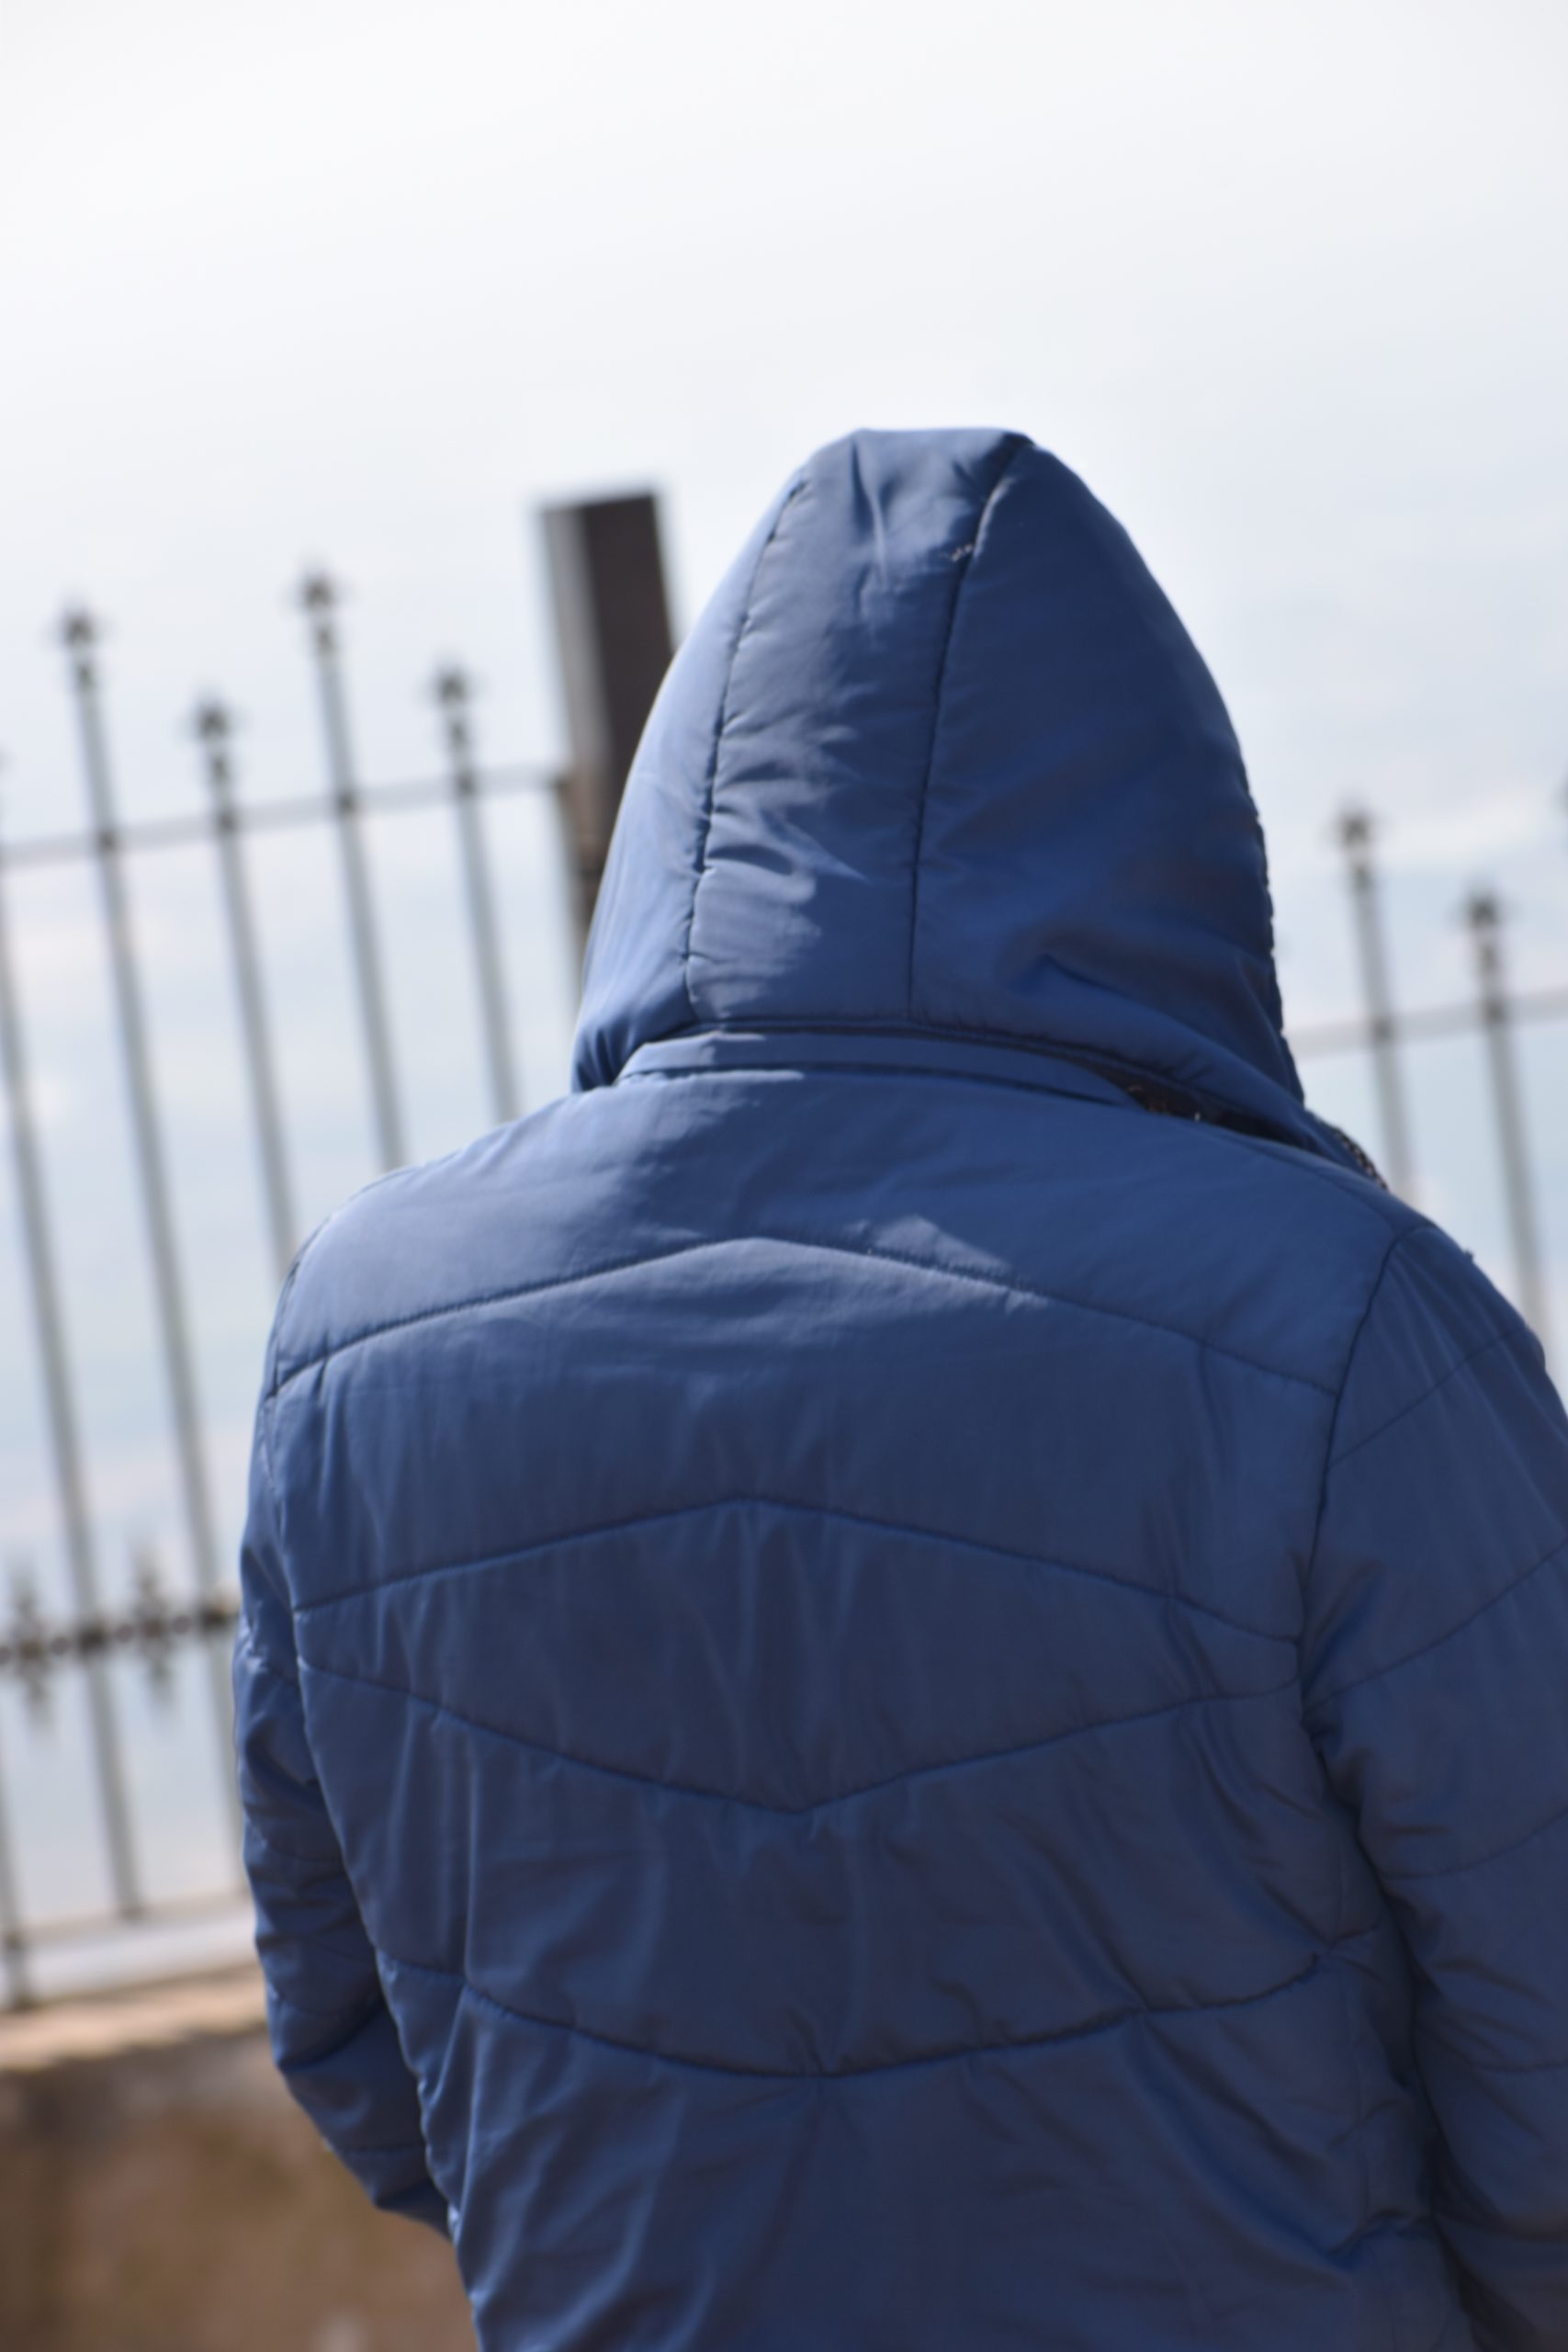 Person wearing a coat